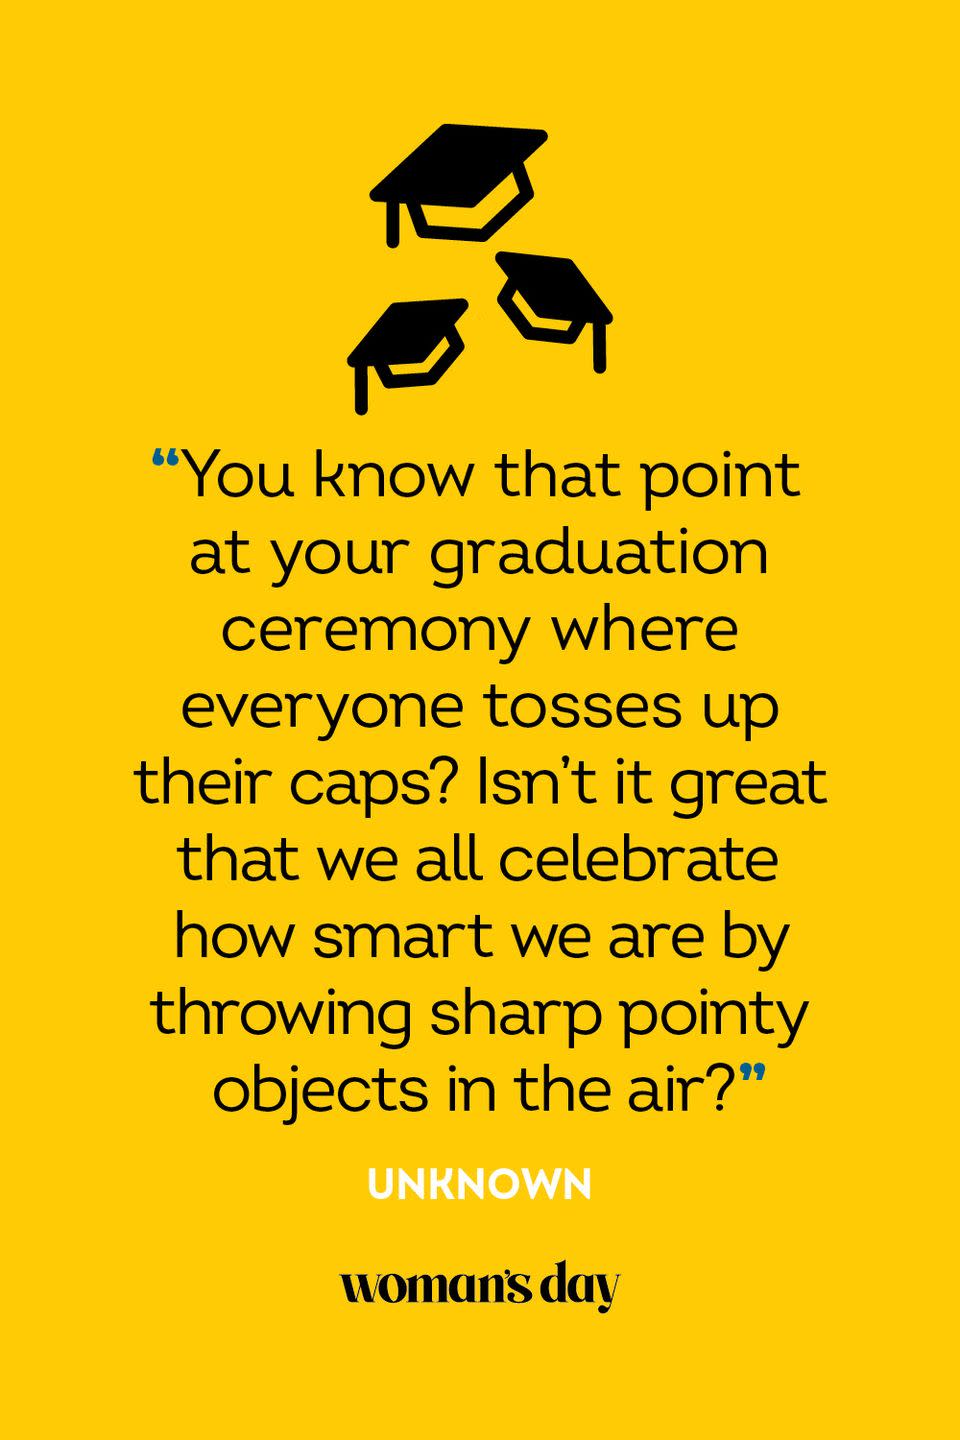 <p>"You know that point at your graduation ceremony where everyone tosses up their caps? Isn't it great that we all celebrate how smart we are by throwing sharp pointy objects in the air?"</p>